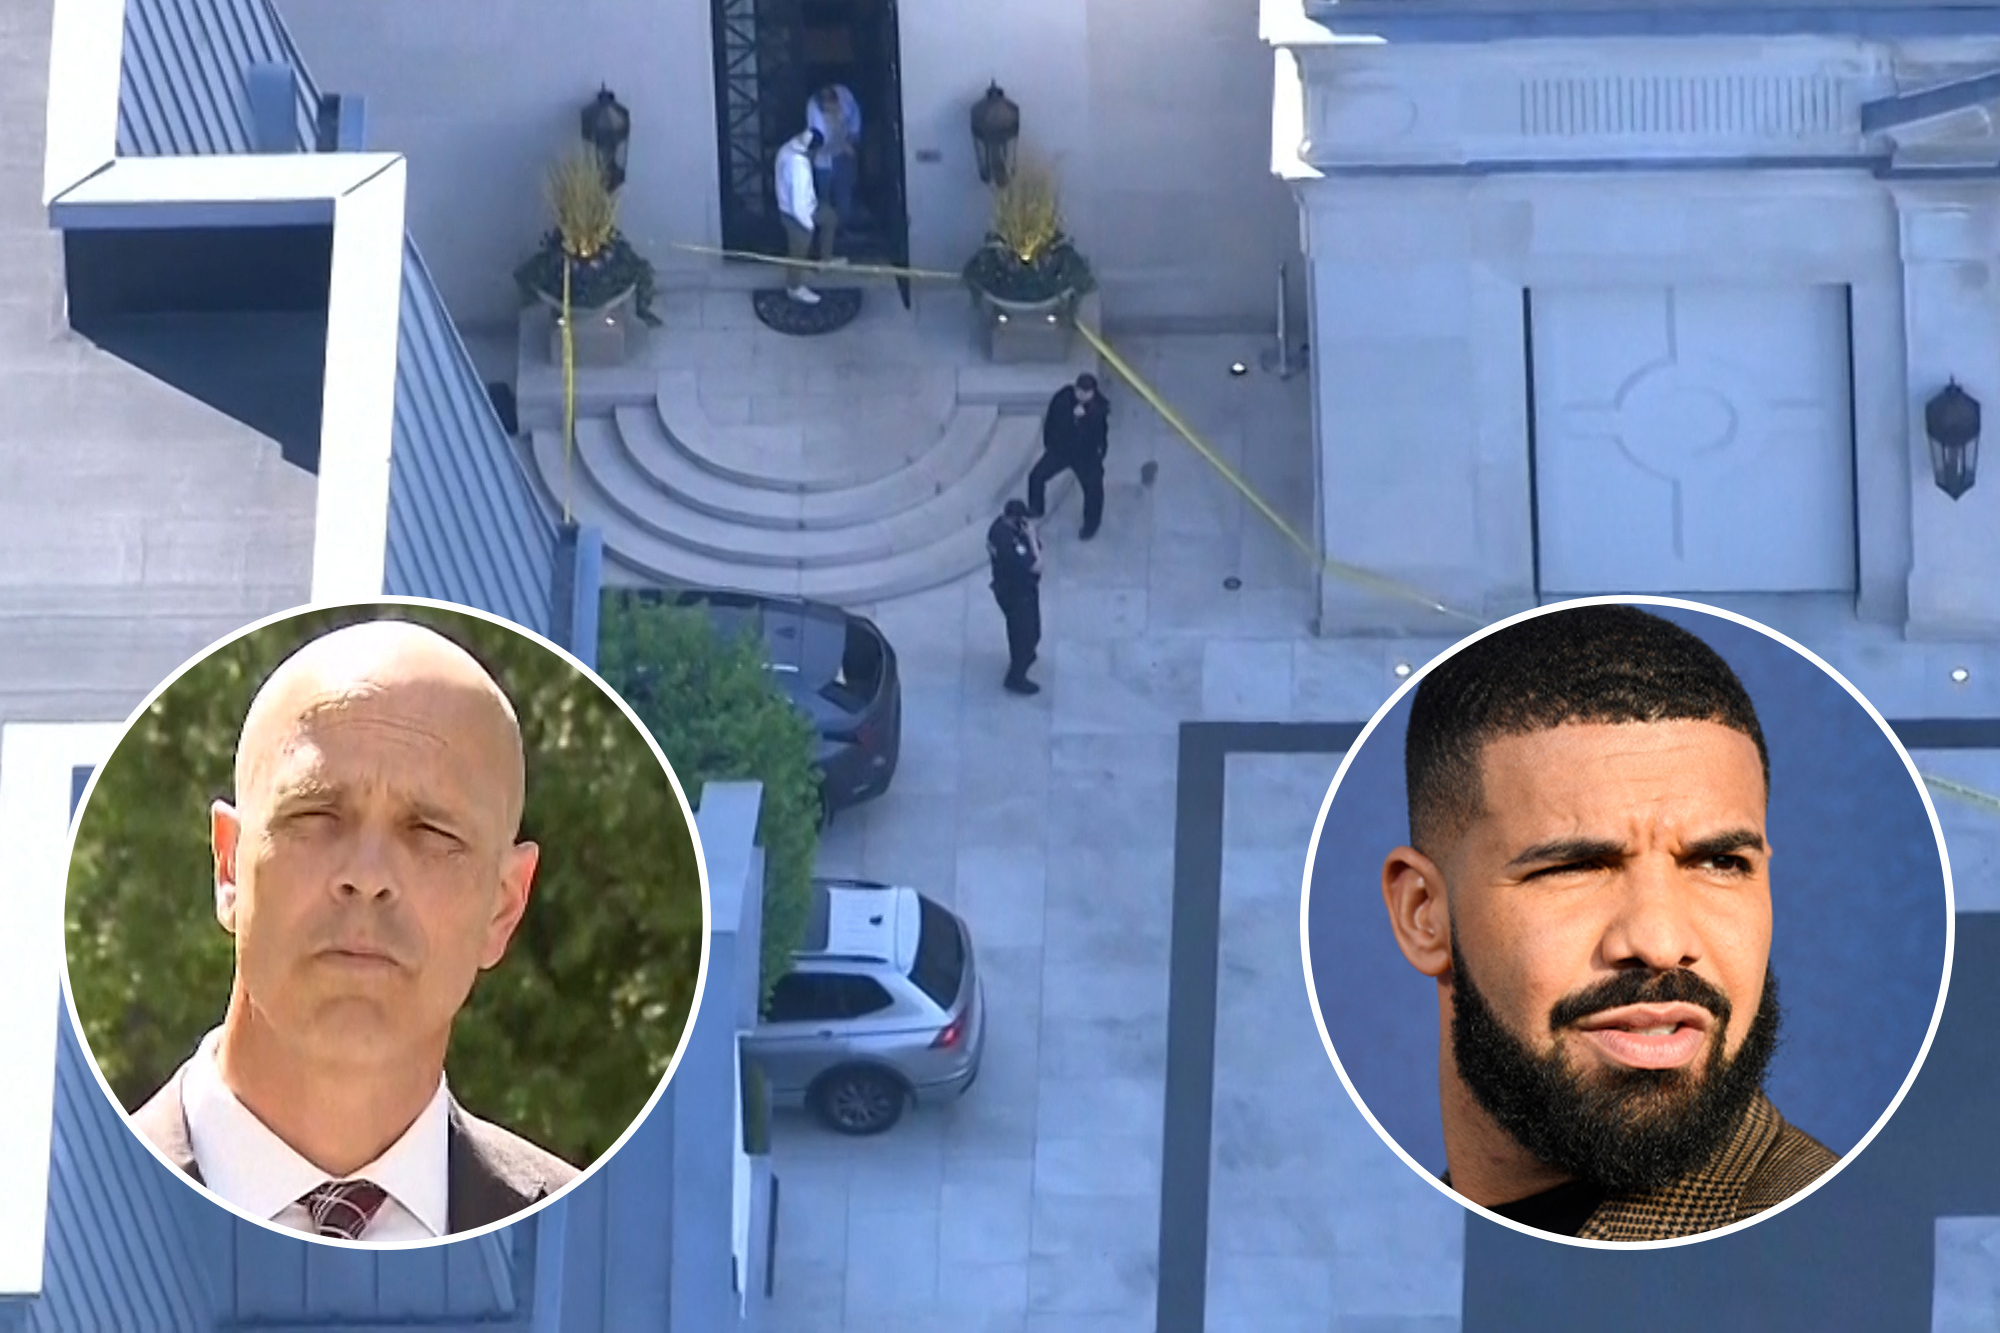 Police give press conference on shooting at Drakes house (Video)